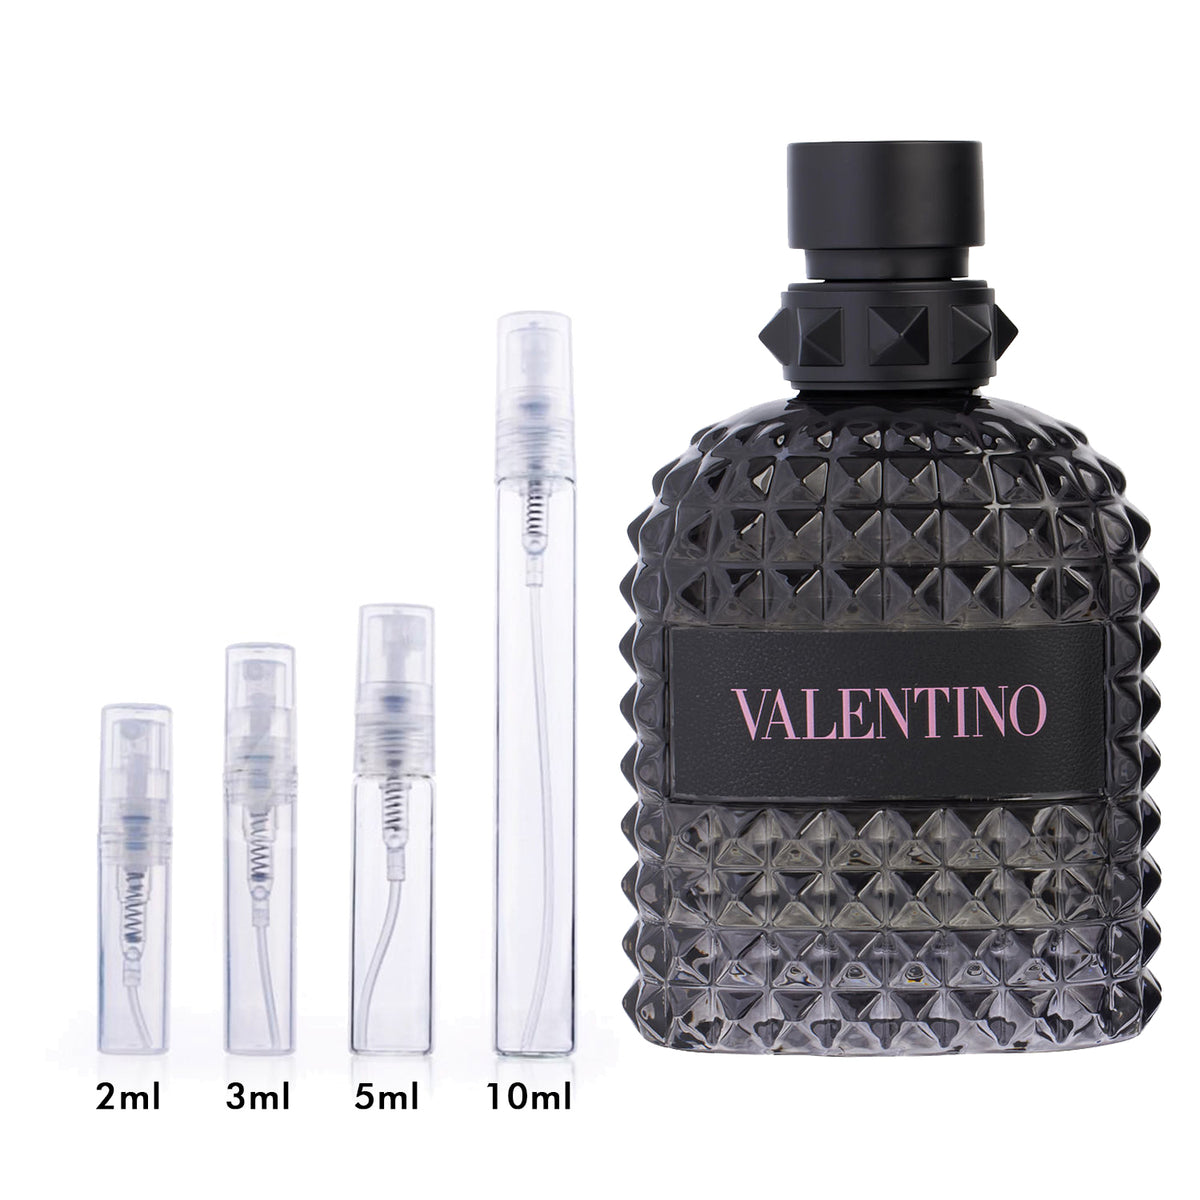 by In Perfume | Sampler Born Uomo de Samples | Roma and Scent Size Valentino Atomizer Fragrance Travel DecantX Eau Toilette